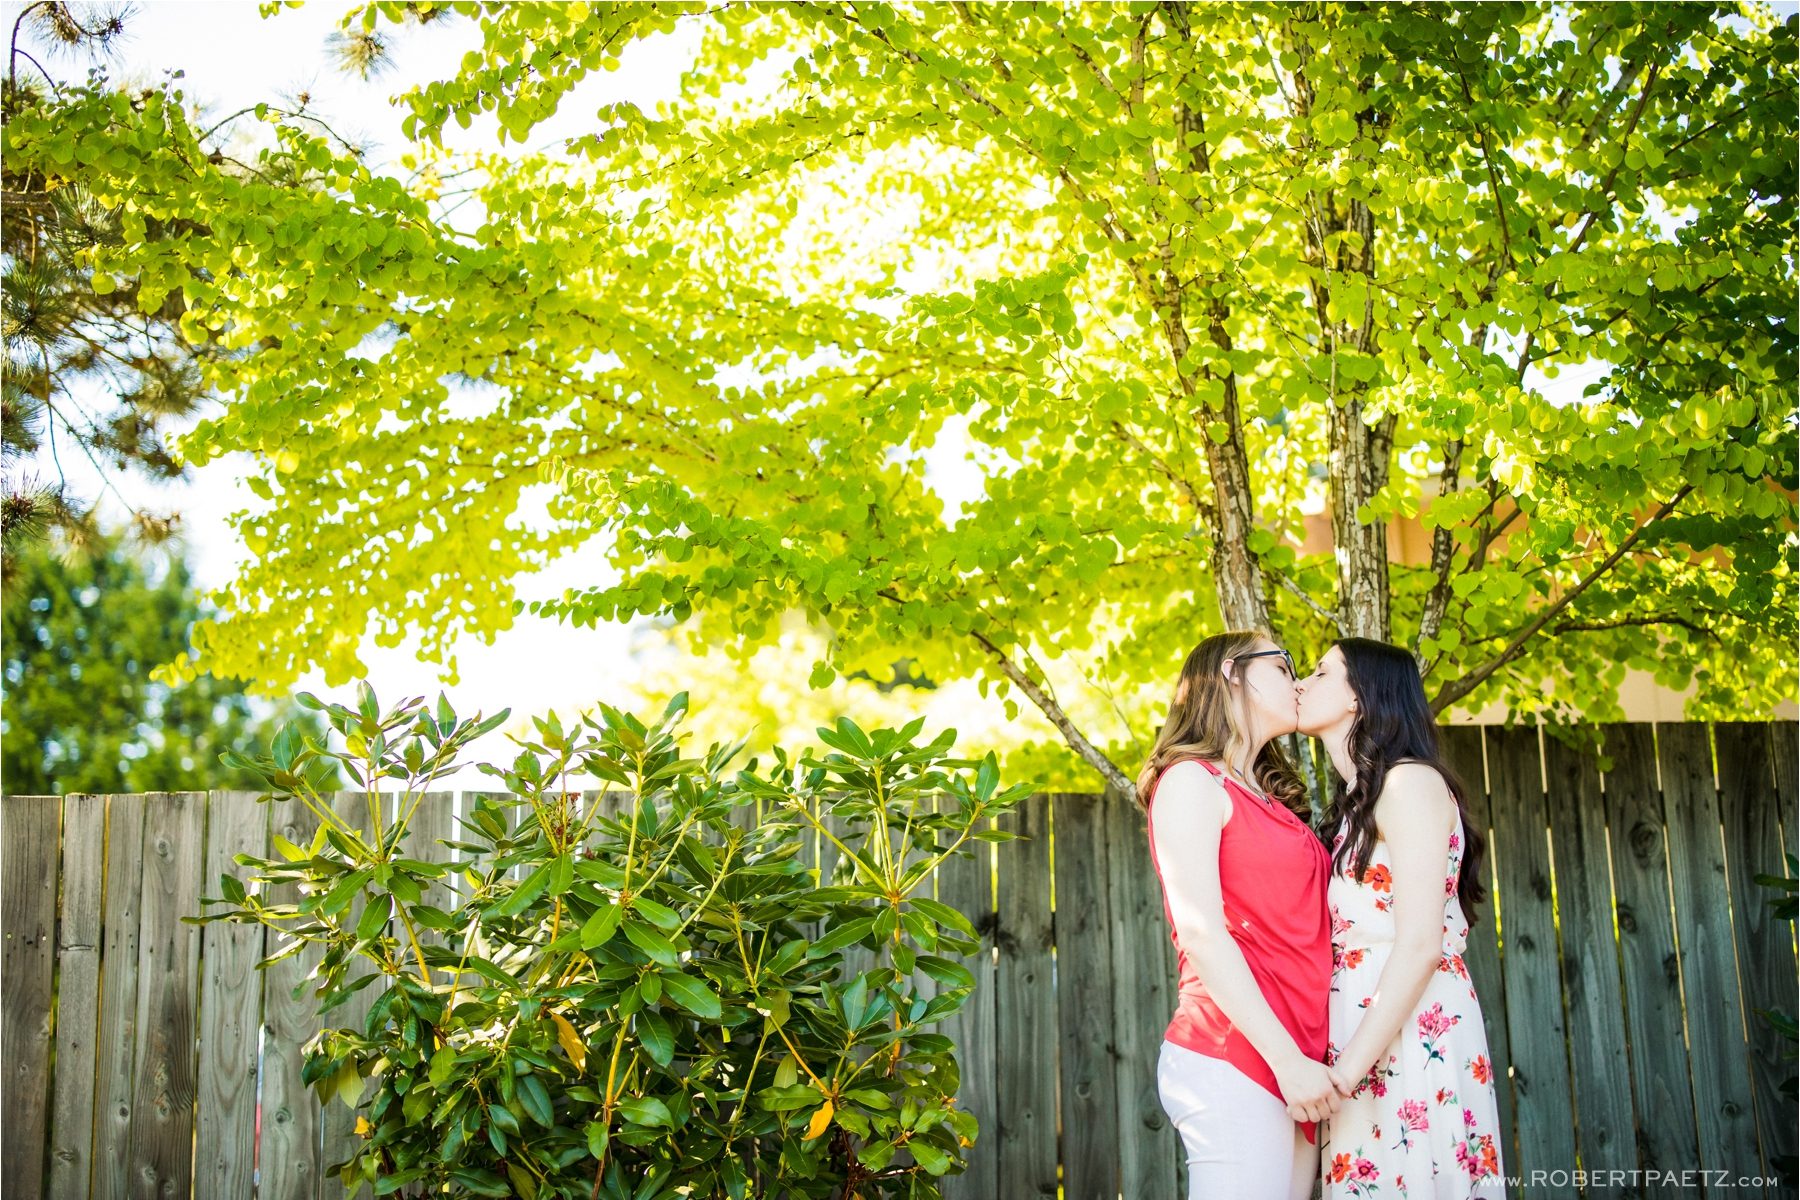 A backyard, social distanced, Zoom wedding in Kirkland Seattle, Washington, during the Covid-19 pandemic photographed by the destination wedding photographer, Robert Paetz.